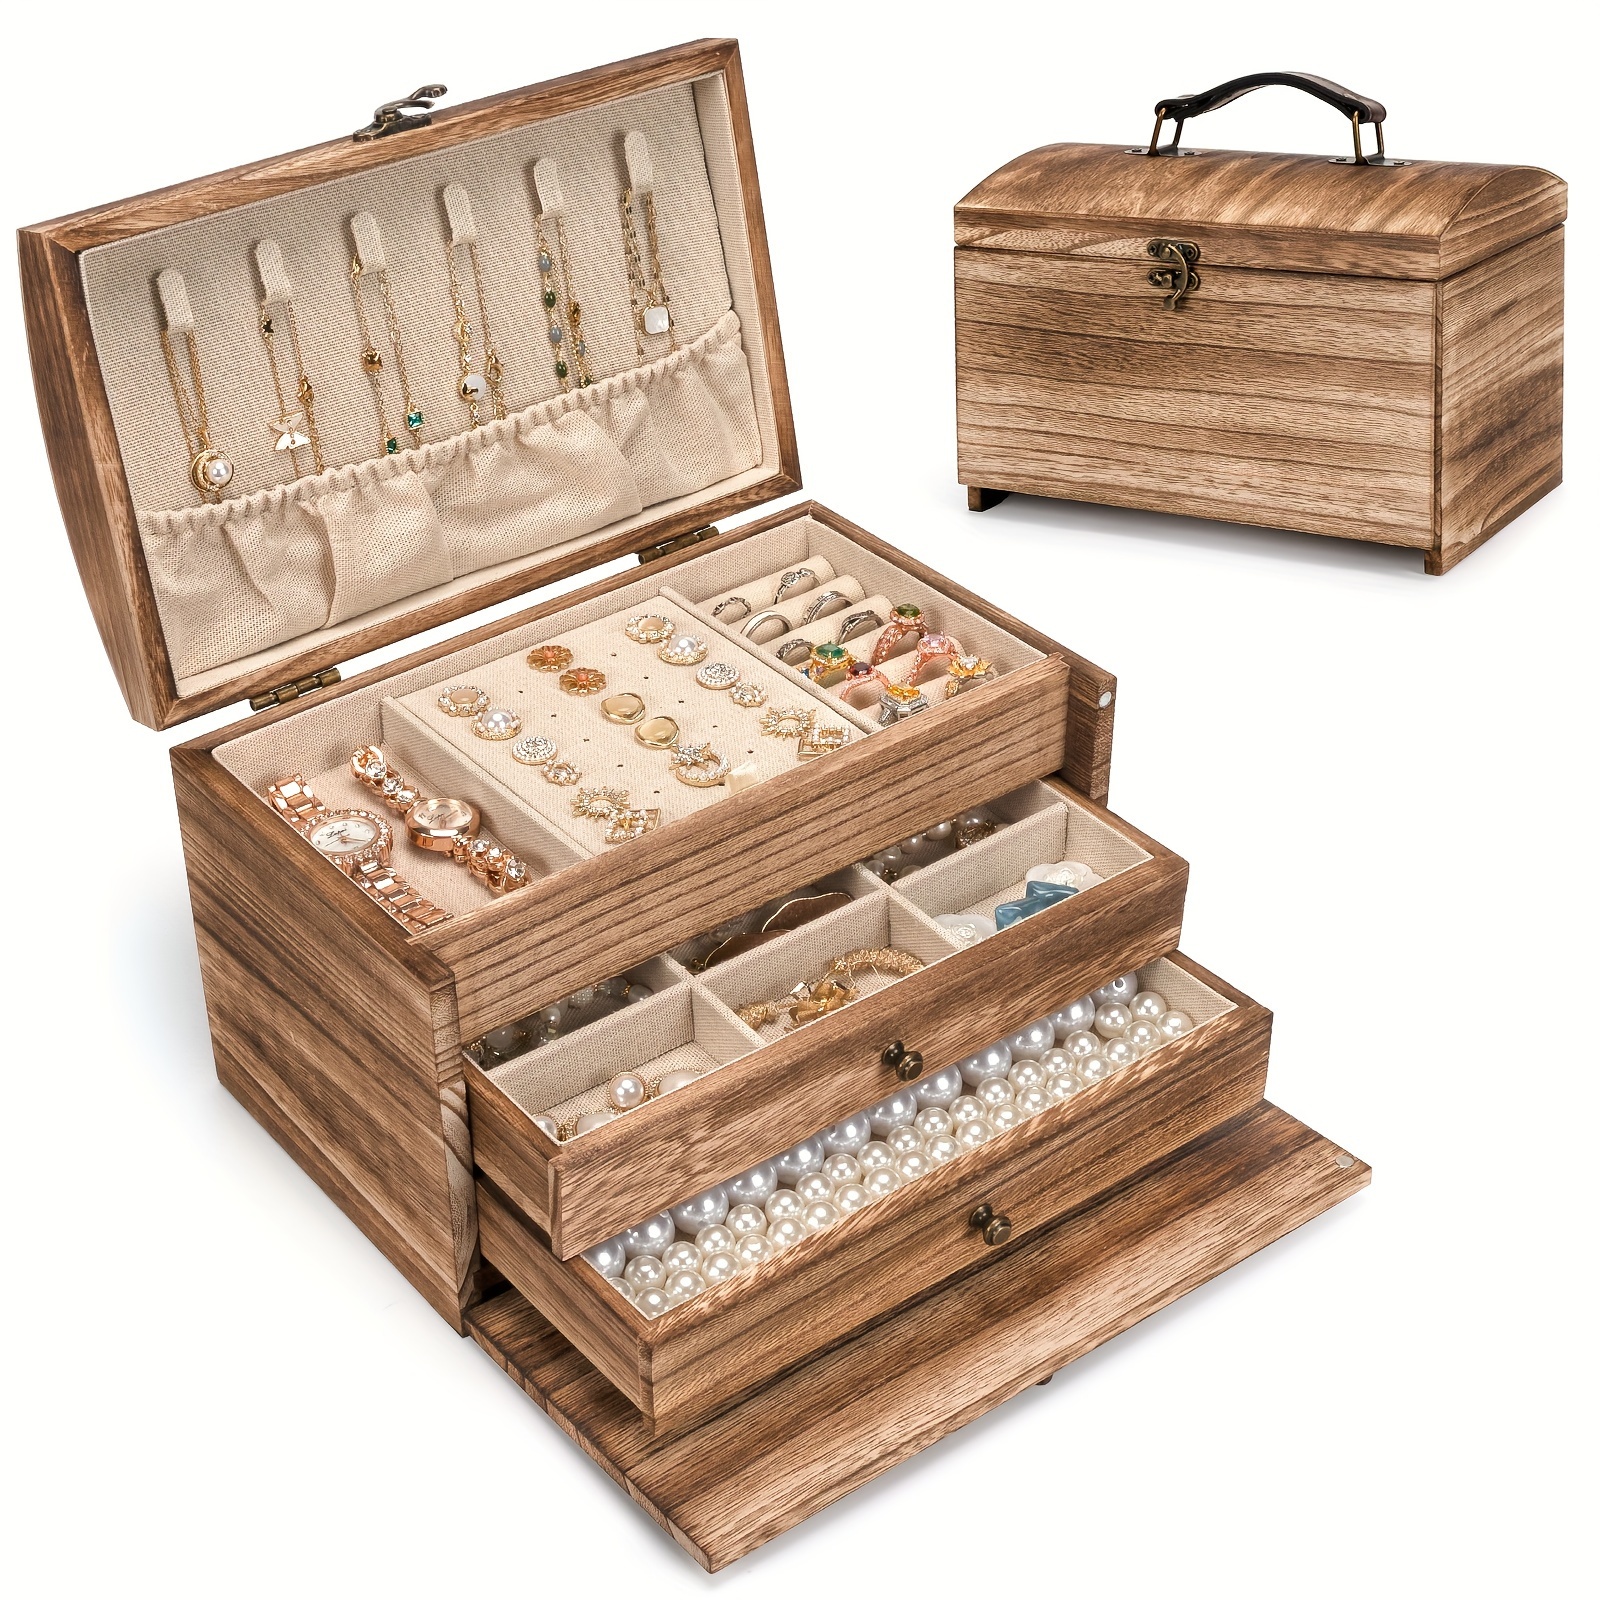 

1pc Jewelry Box Organizer, Wooden Jewelry Boxes For Women Girls, 3 Layer Travel Jewelry Case For Earring Necklace Rings Bracelets